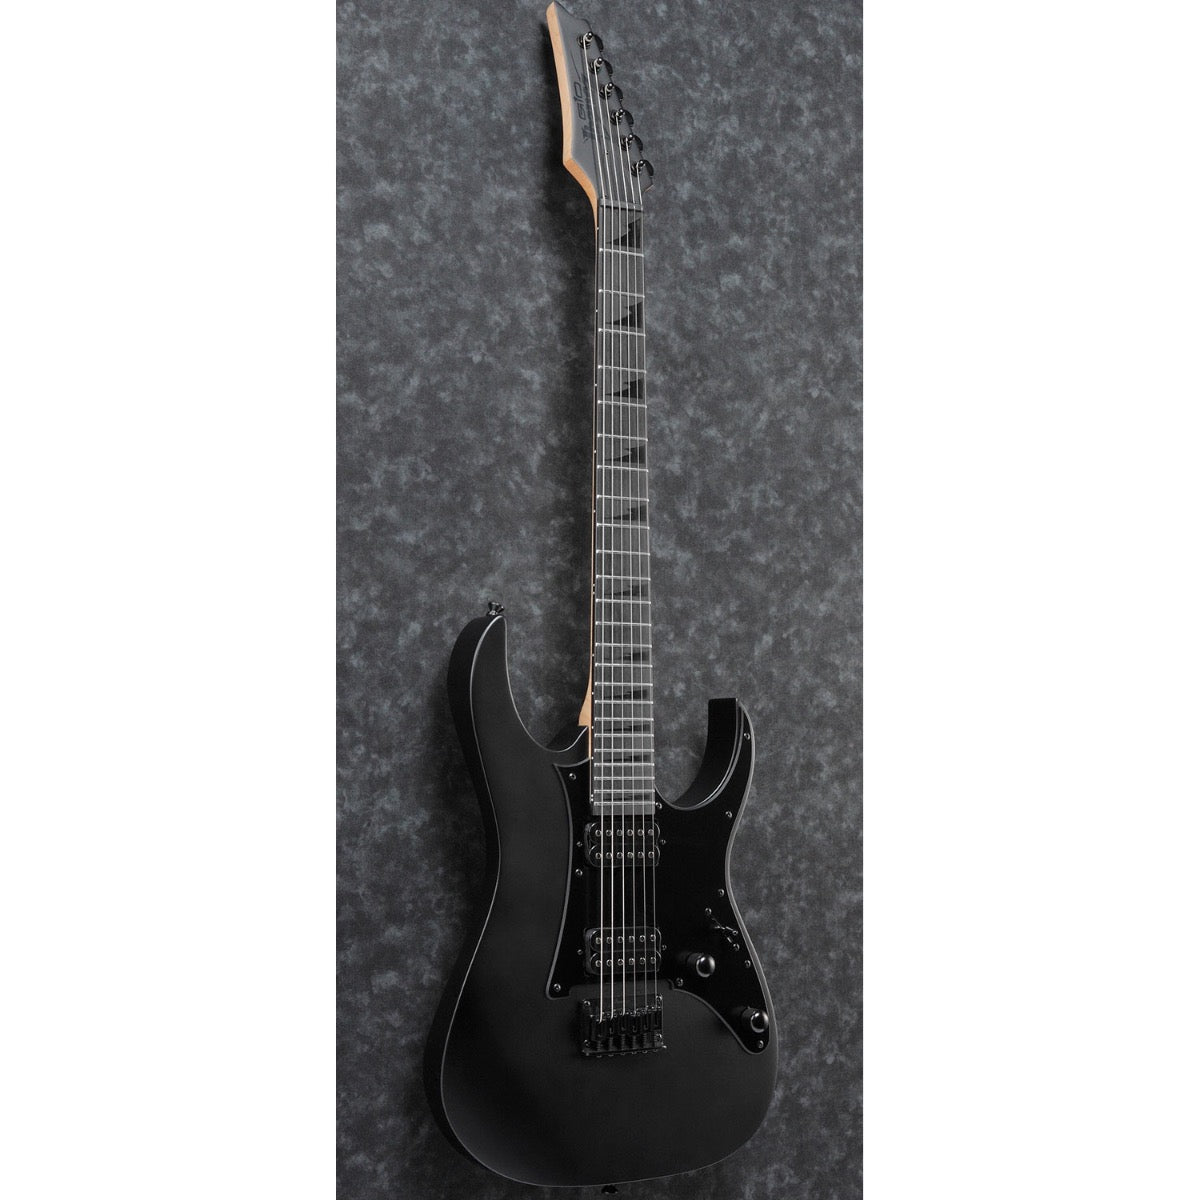 Perspective view of Ibanez GRGR131EX GIO Electric Guitar - Black Flat showing top and left side